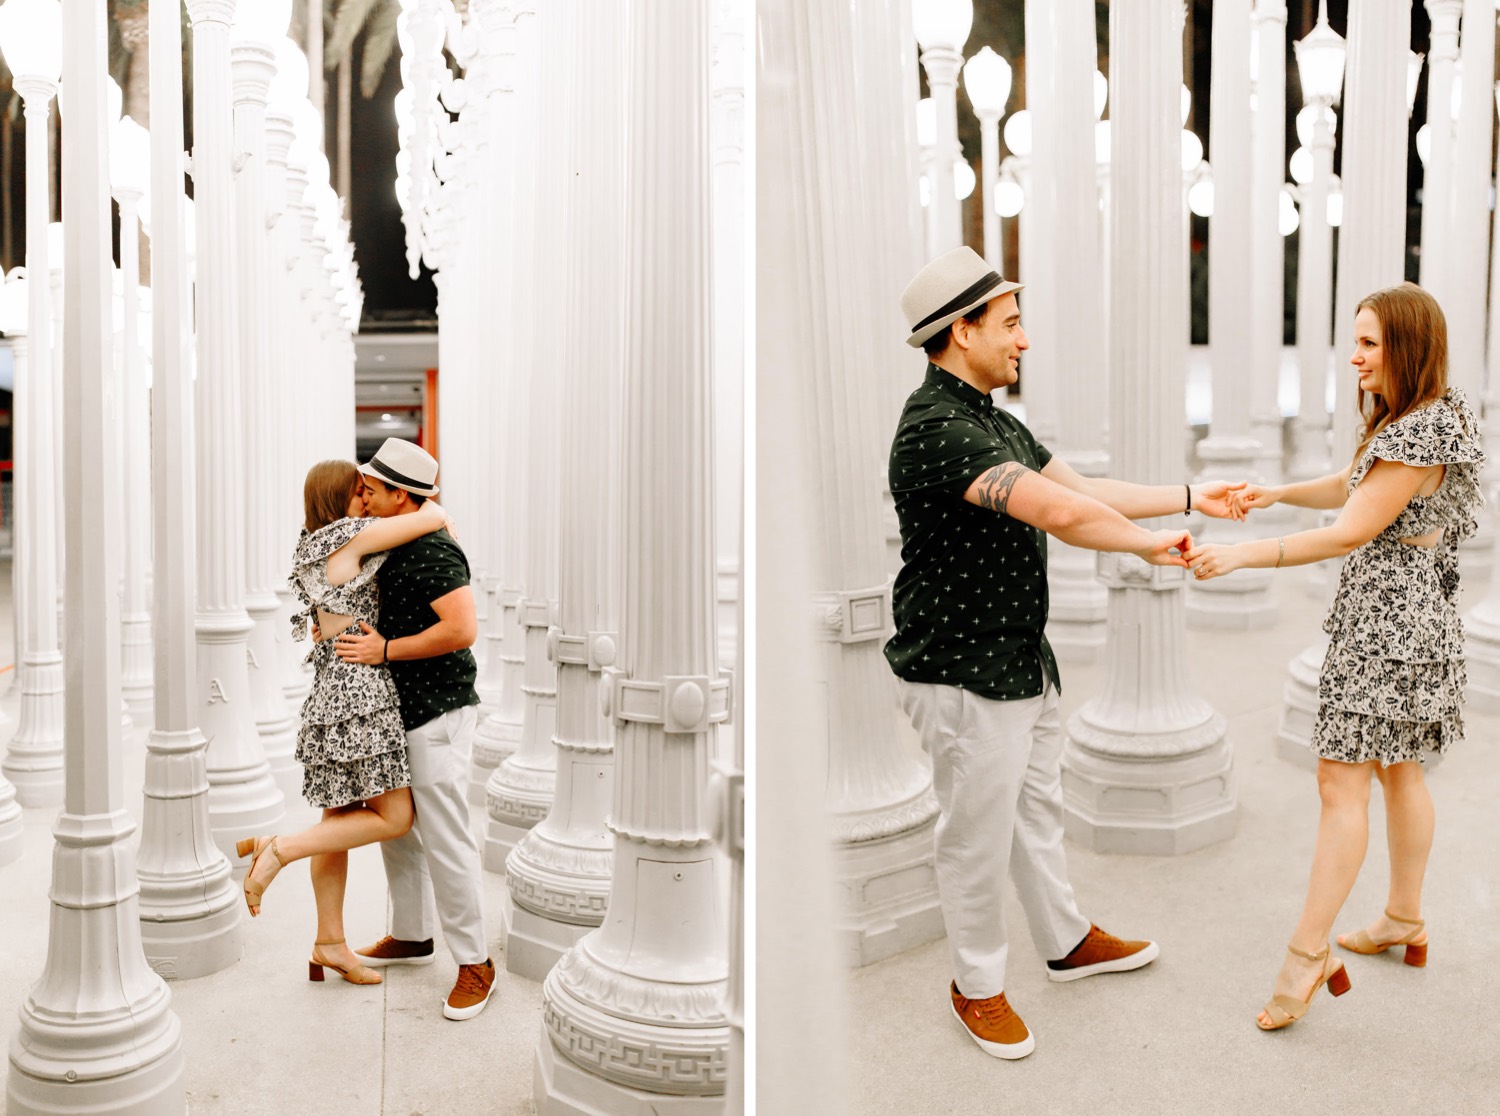 Los Angeles engagement photo locations